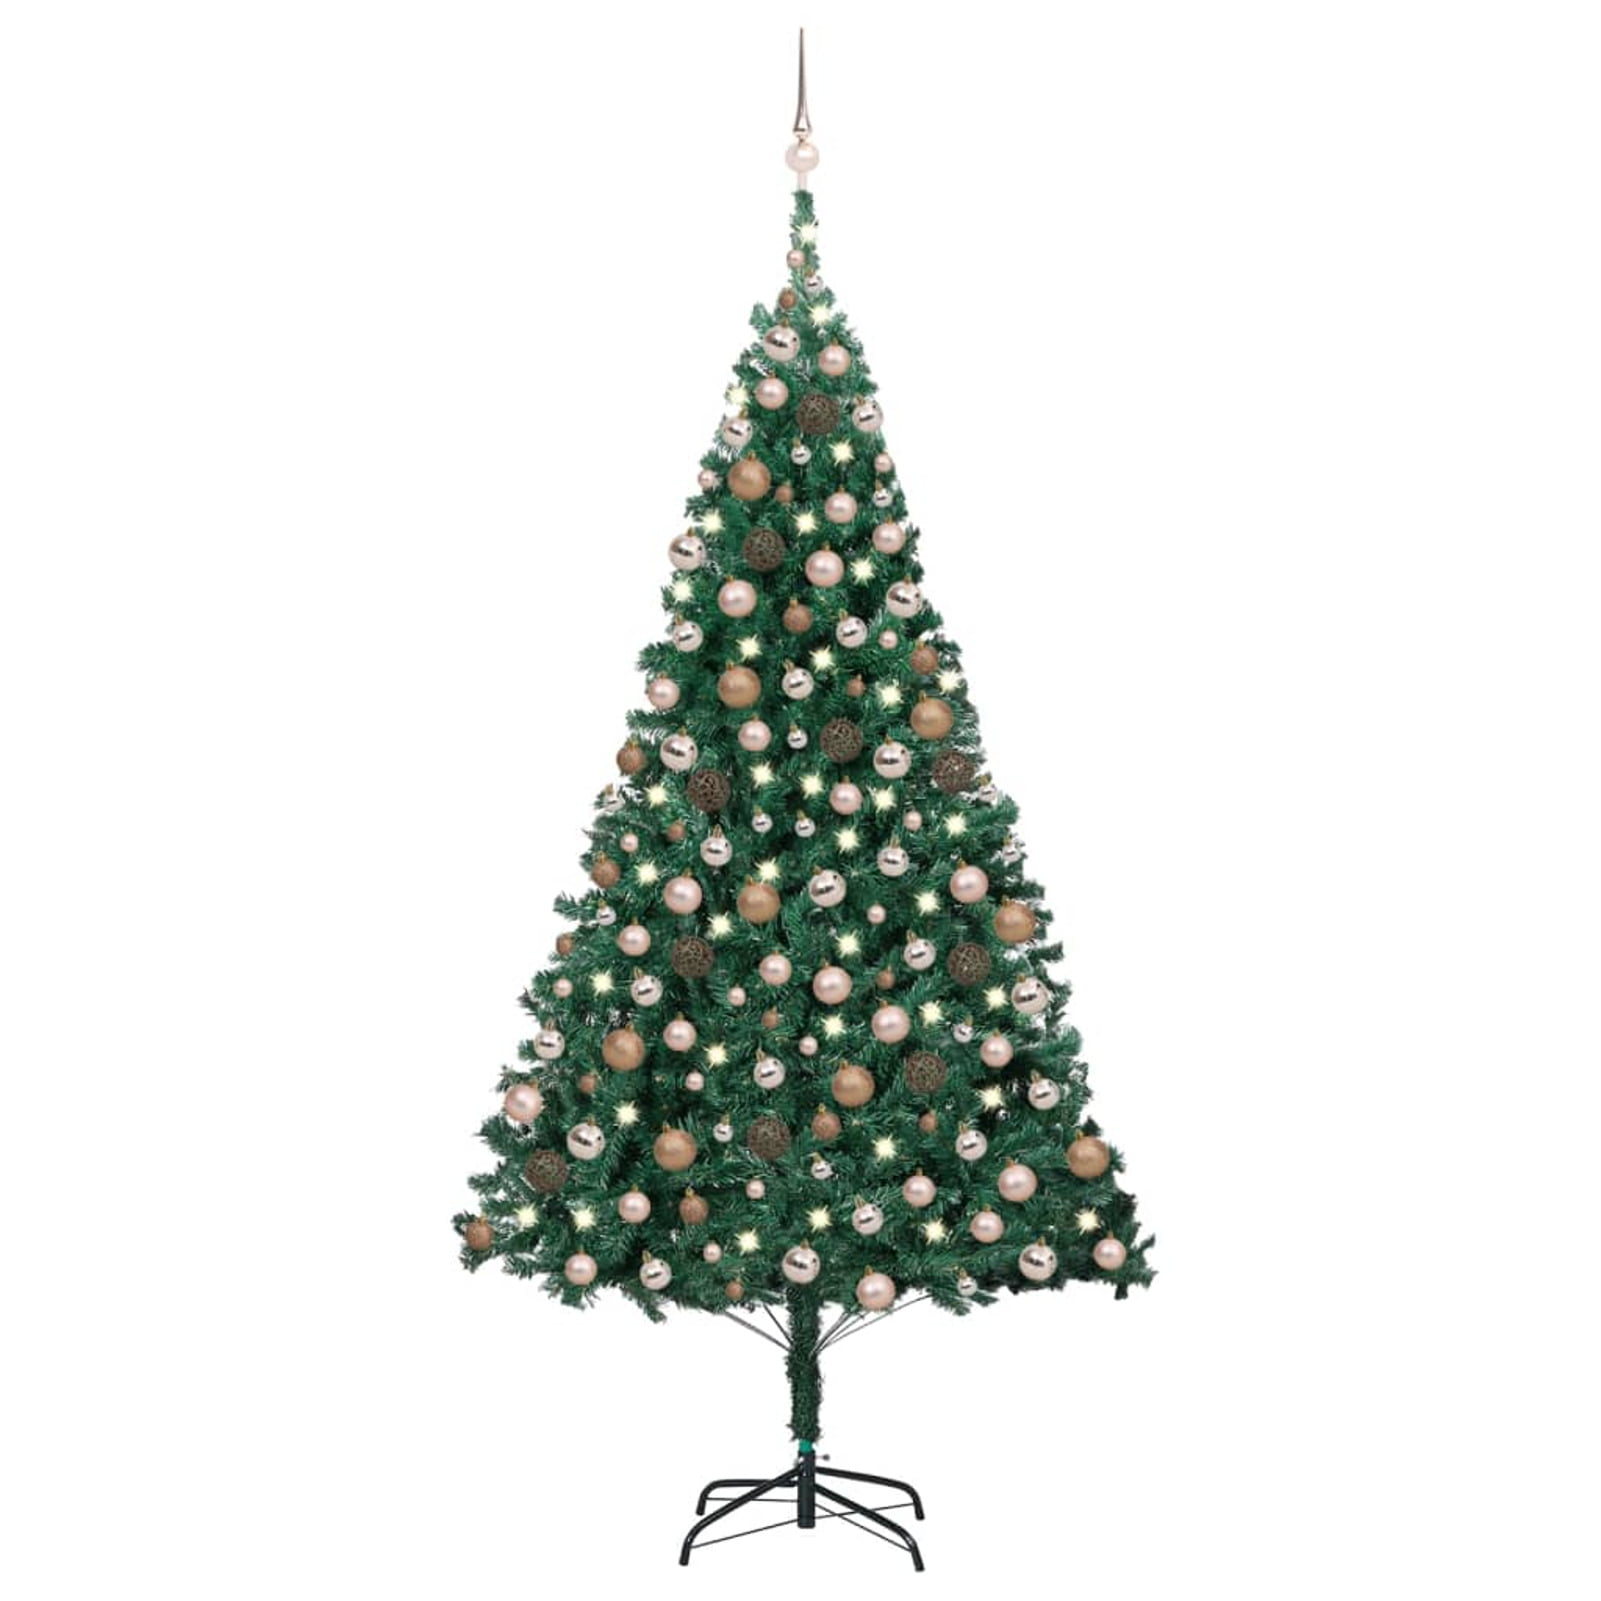 Details about   100 x Green Christmas Tree Bauble Ornament Decoration Wire Hook Clip Hanger 